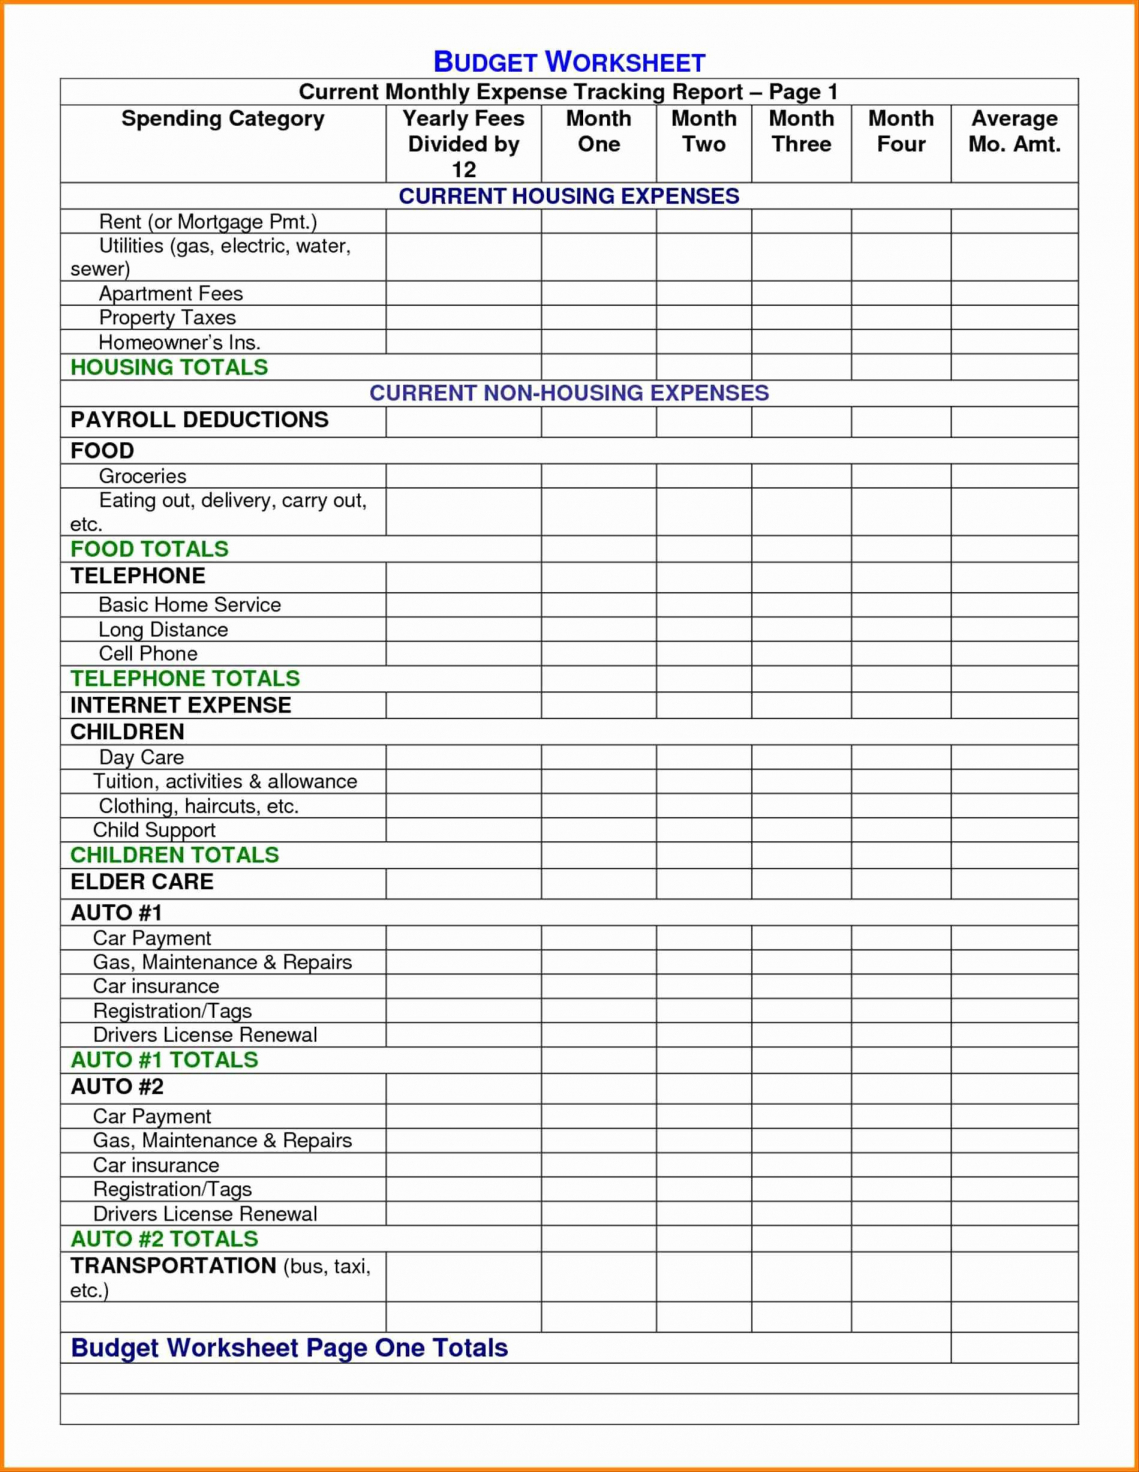 Excel Accounting Templates For Small Businesses Best Excel to Accounting Spreadsheets For Small Business